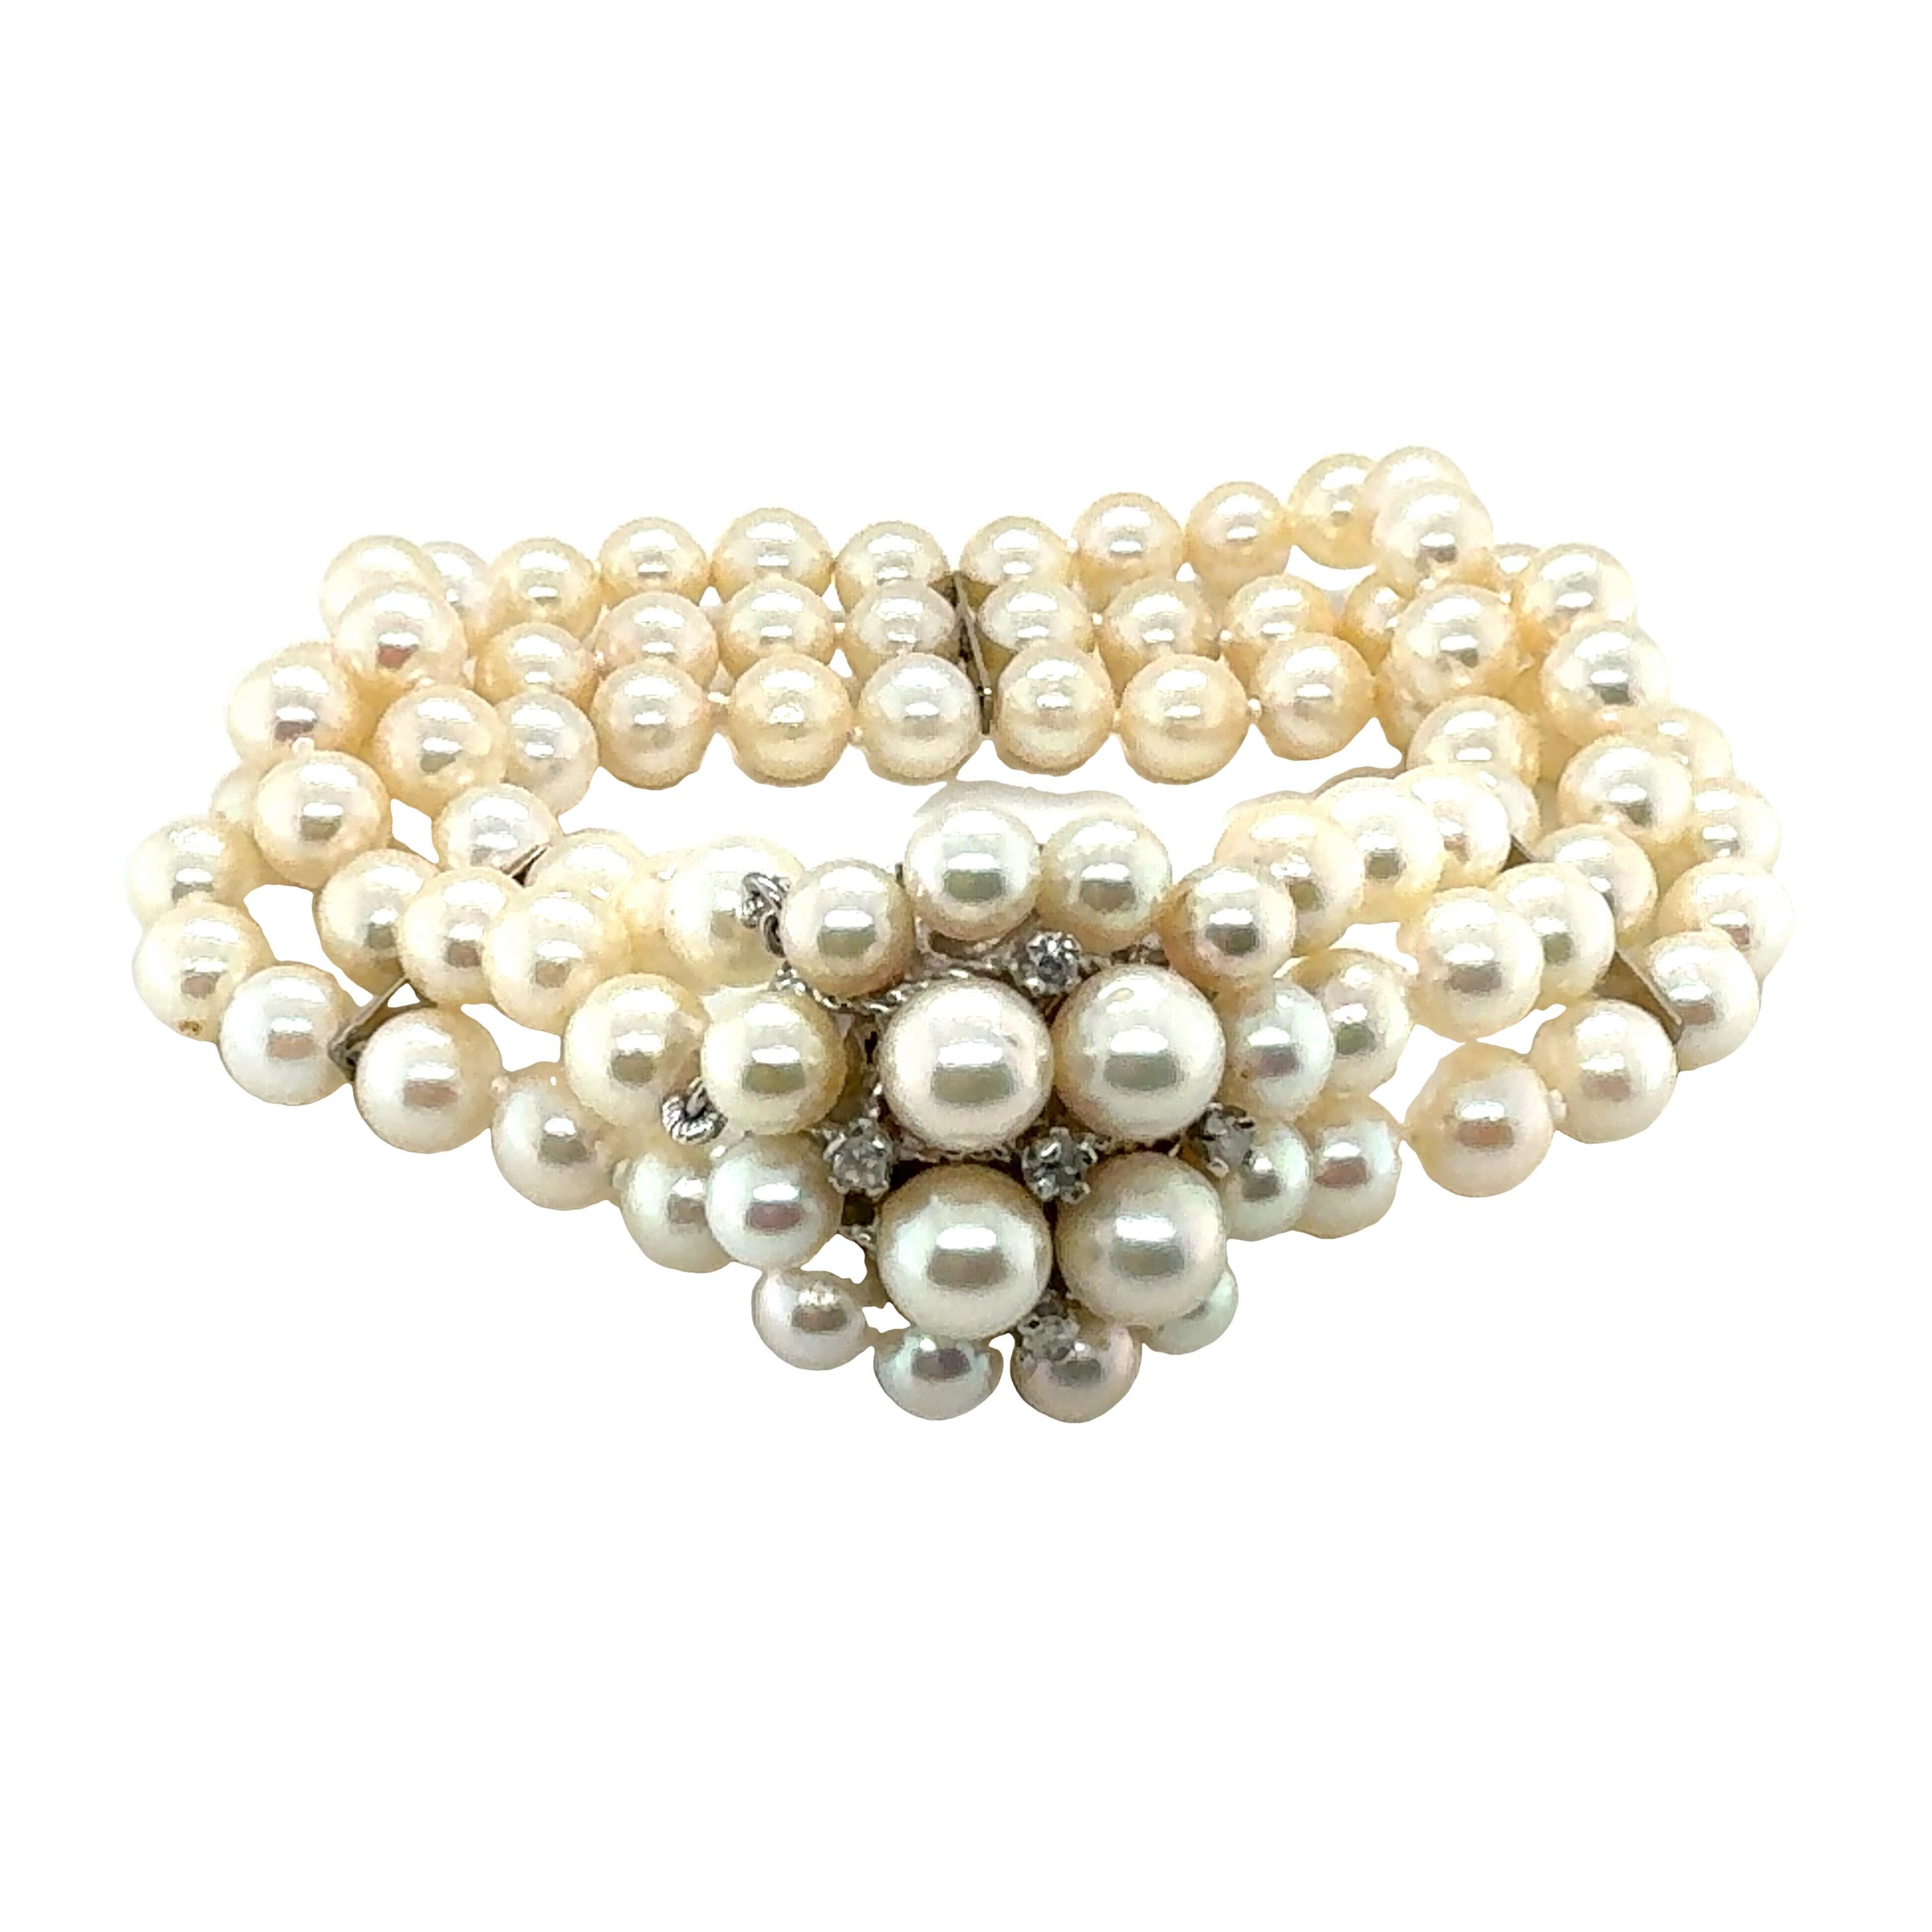 One multi-strand pearl bracelet in 14K white gold featuring three strands of white, round cultured pearls measuring 6.00-6.50 millimeters in diameter on average with A rating. Also features a round clasp enhanced by pearls and diamond accents of 5